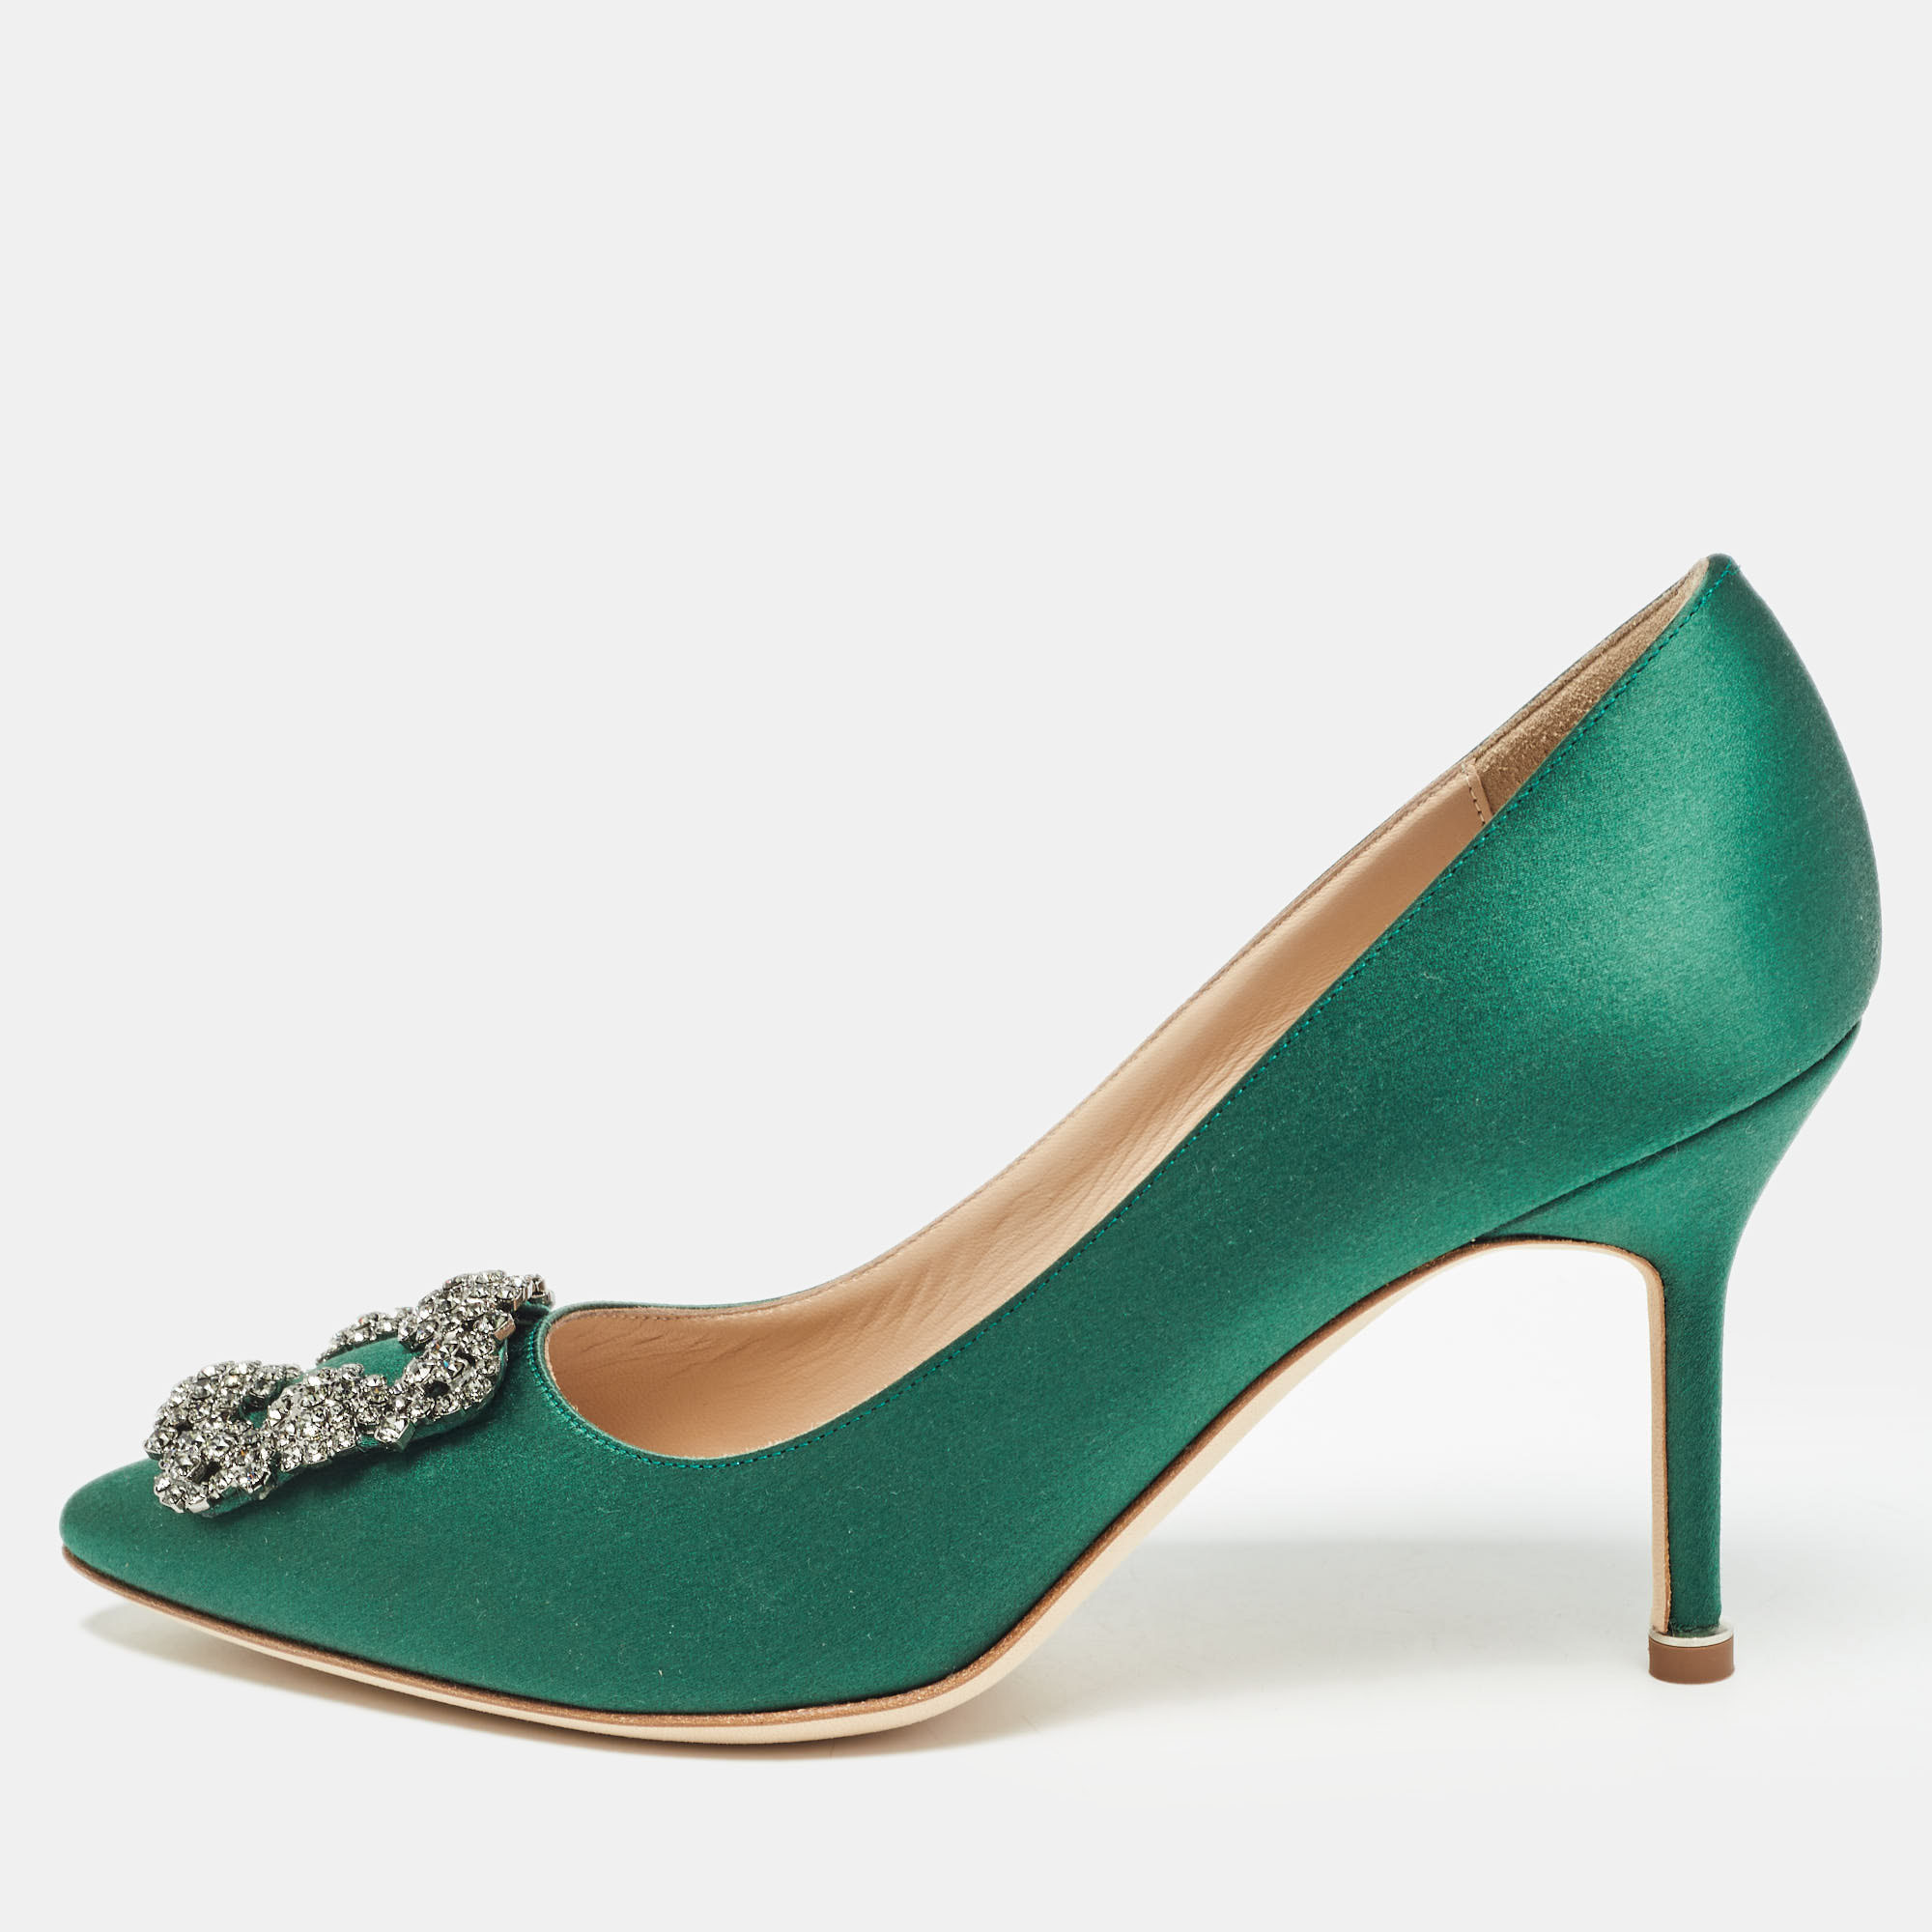 Pre-owned Manolo Blahnik Green Satin Hangisi Crystal Embellished Pointed Toe Pumps Size 37.5